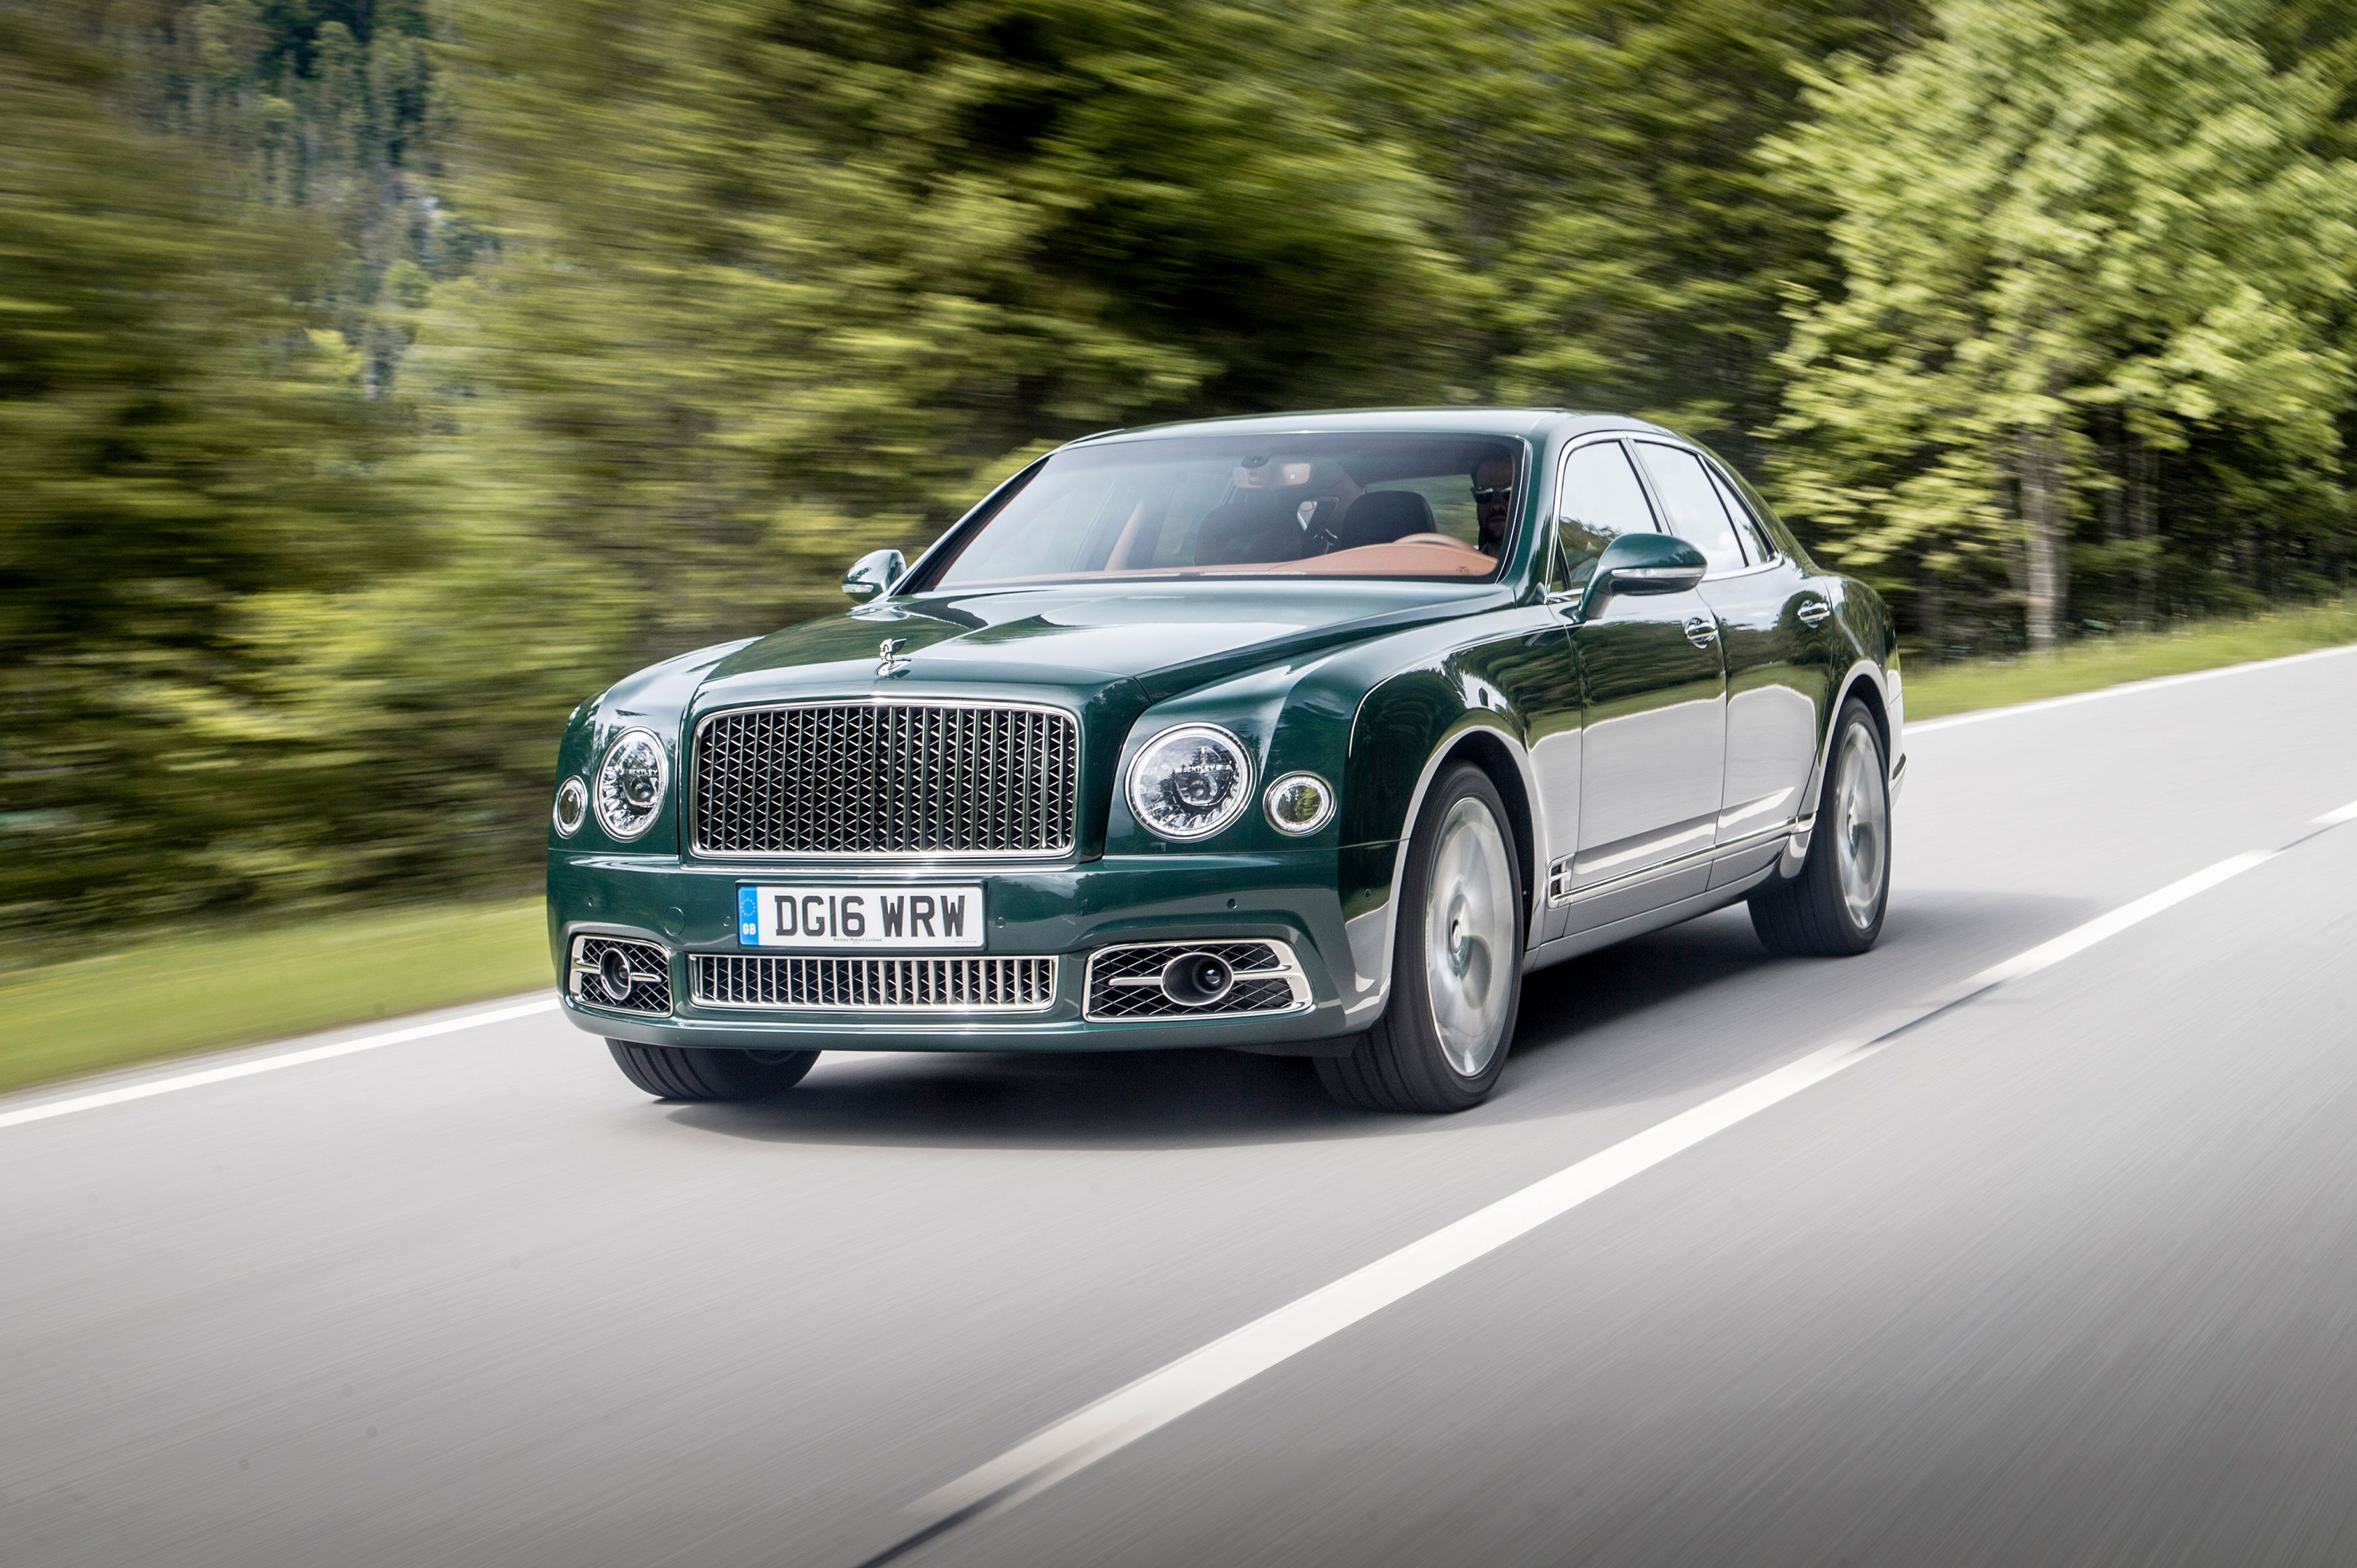 For Sale: Bentley Mulsanne Speed (2019) offered for £165,000